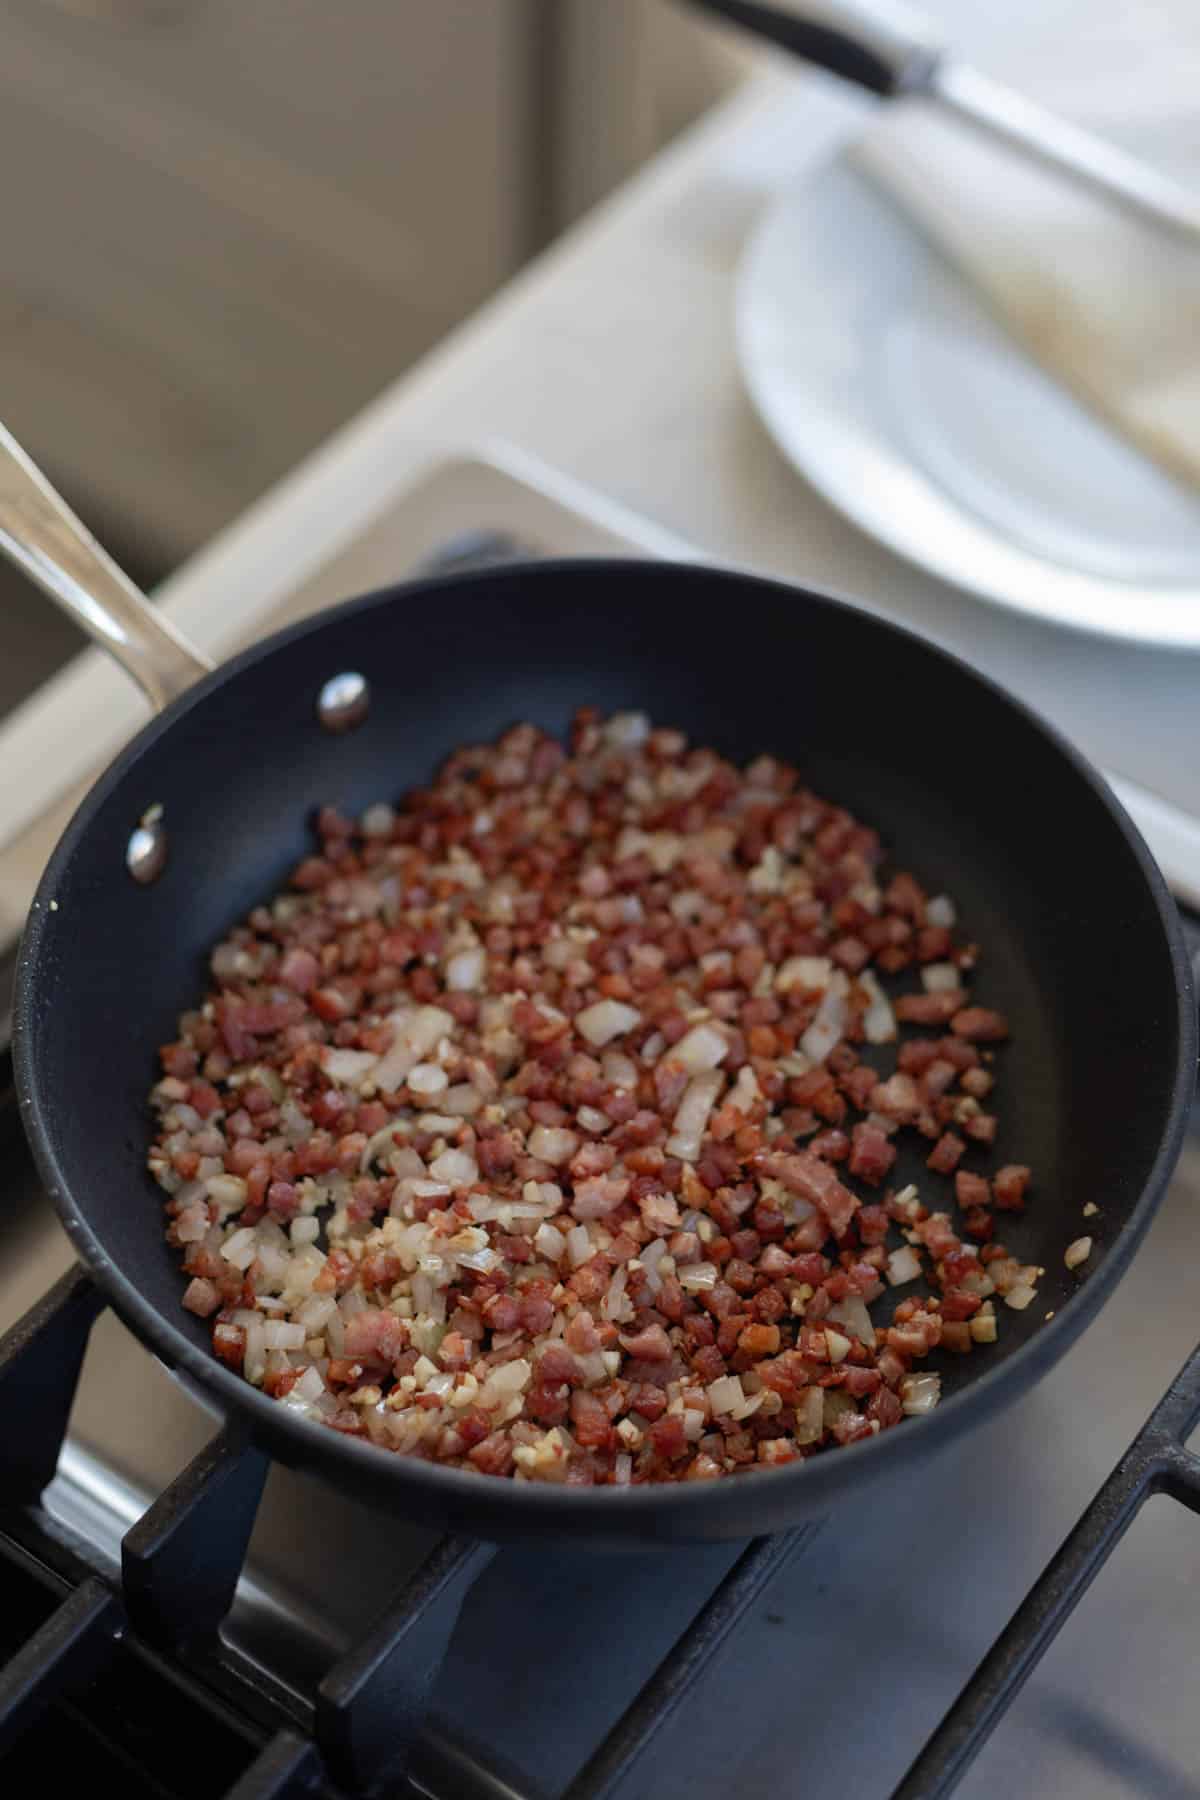 pancetta, garlic, and shallots being cooked in a small black skillet